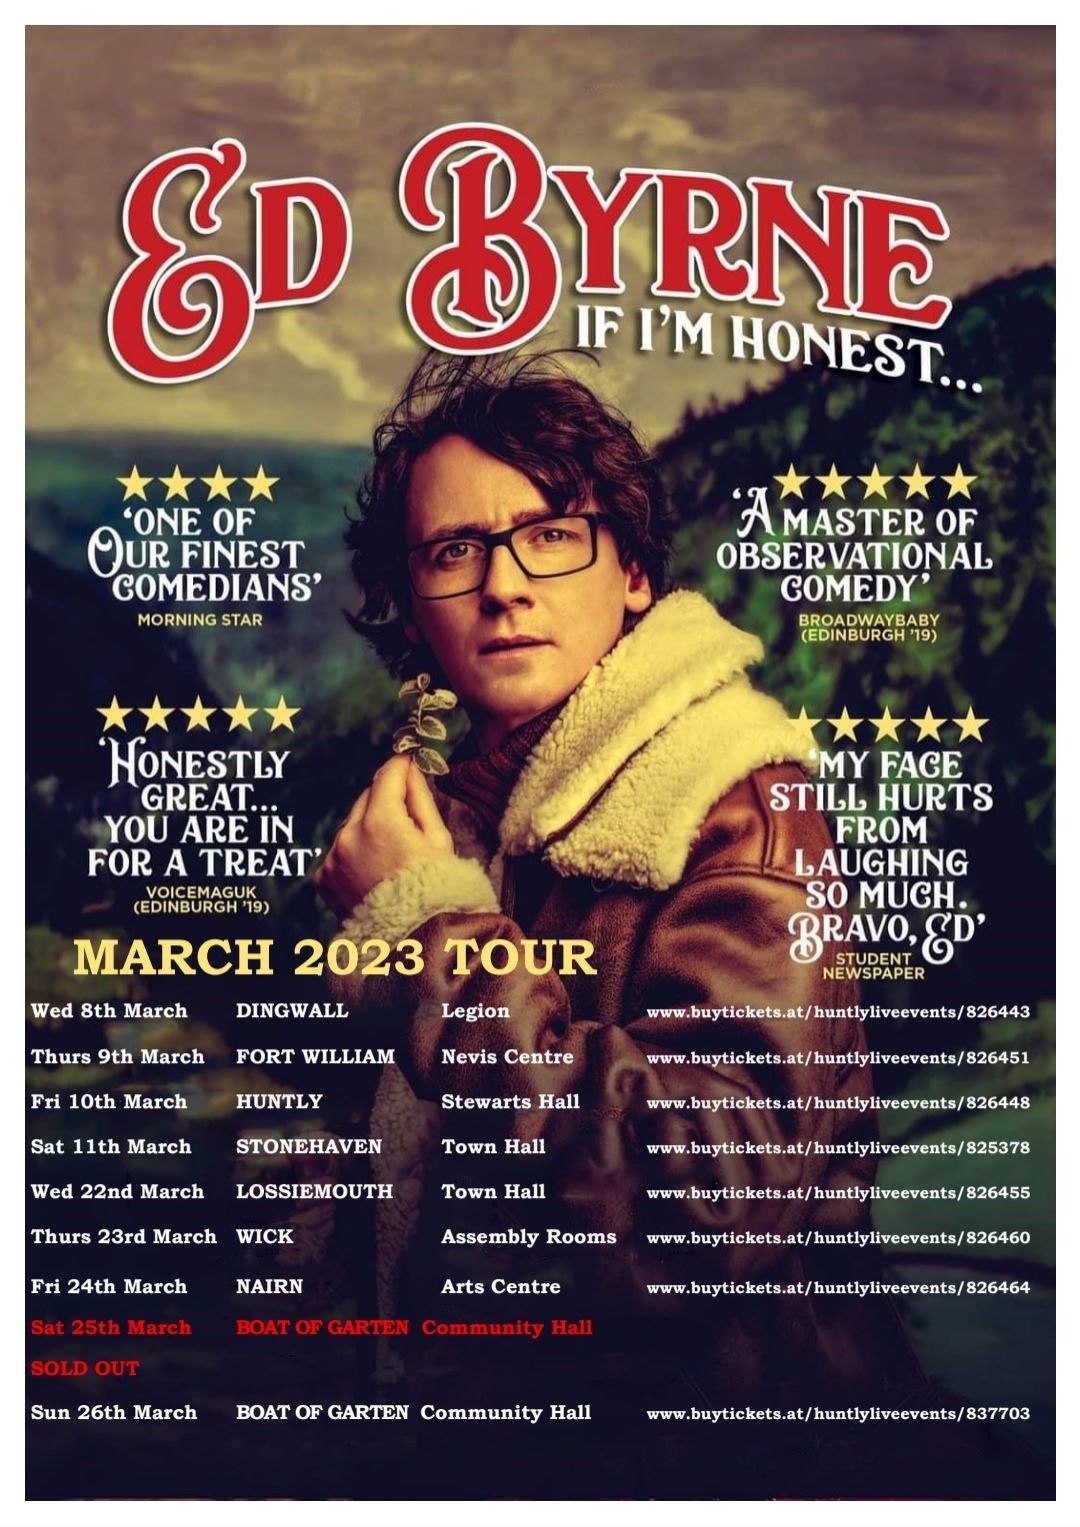 Ed Byrne is set to visit venues across the north-east in March.